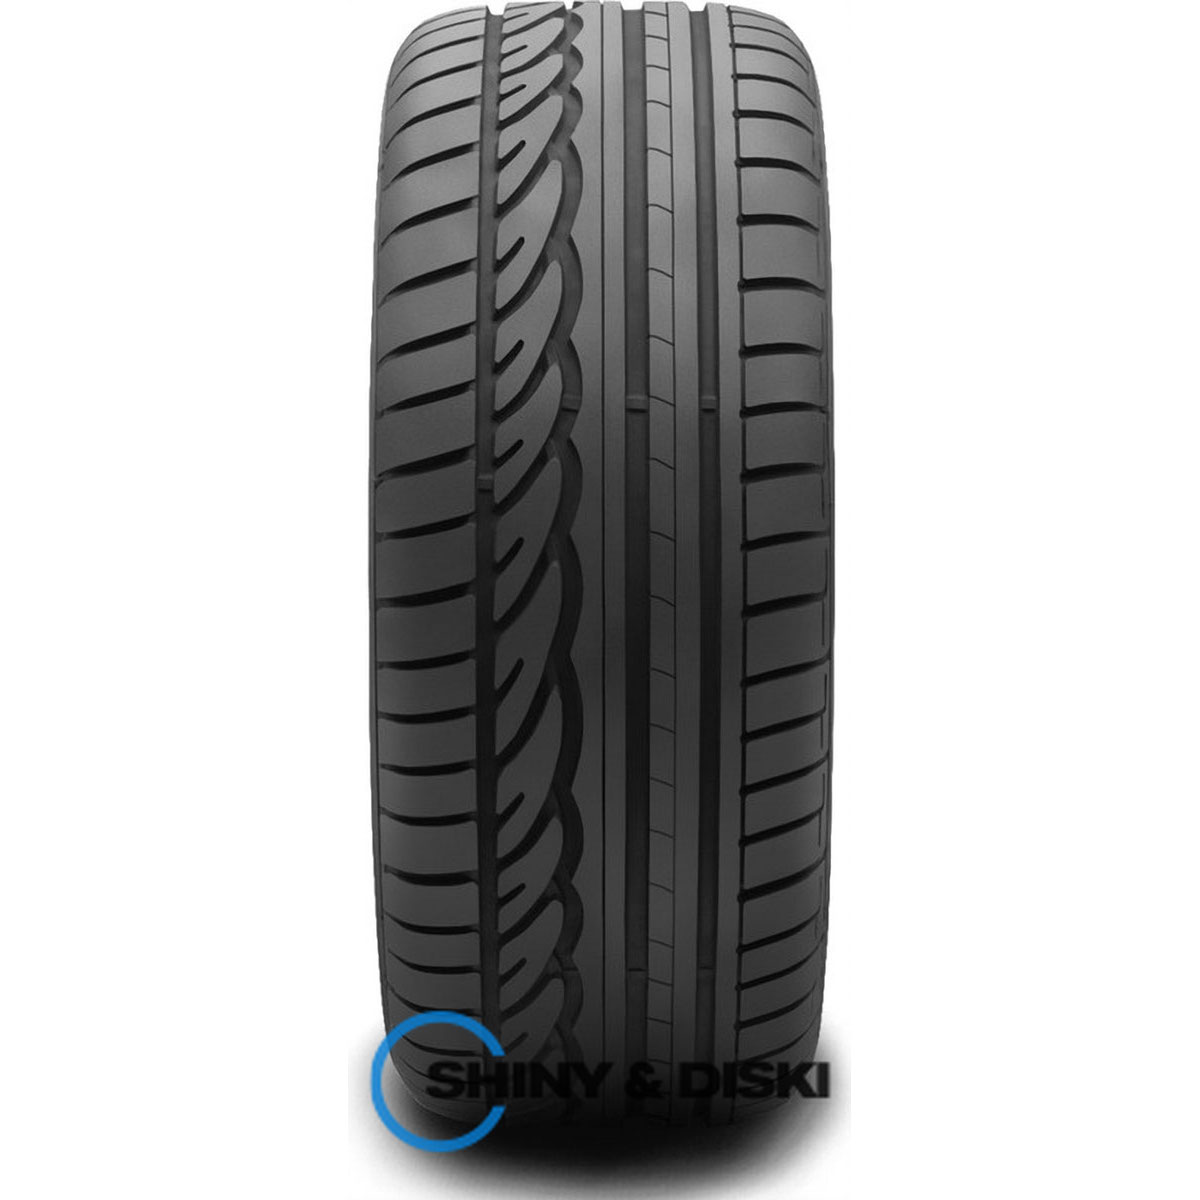 резина dunlop sp sport 01 a/s 175/70 r14 88t